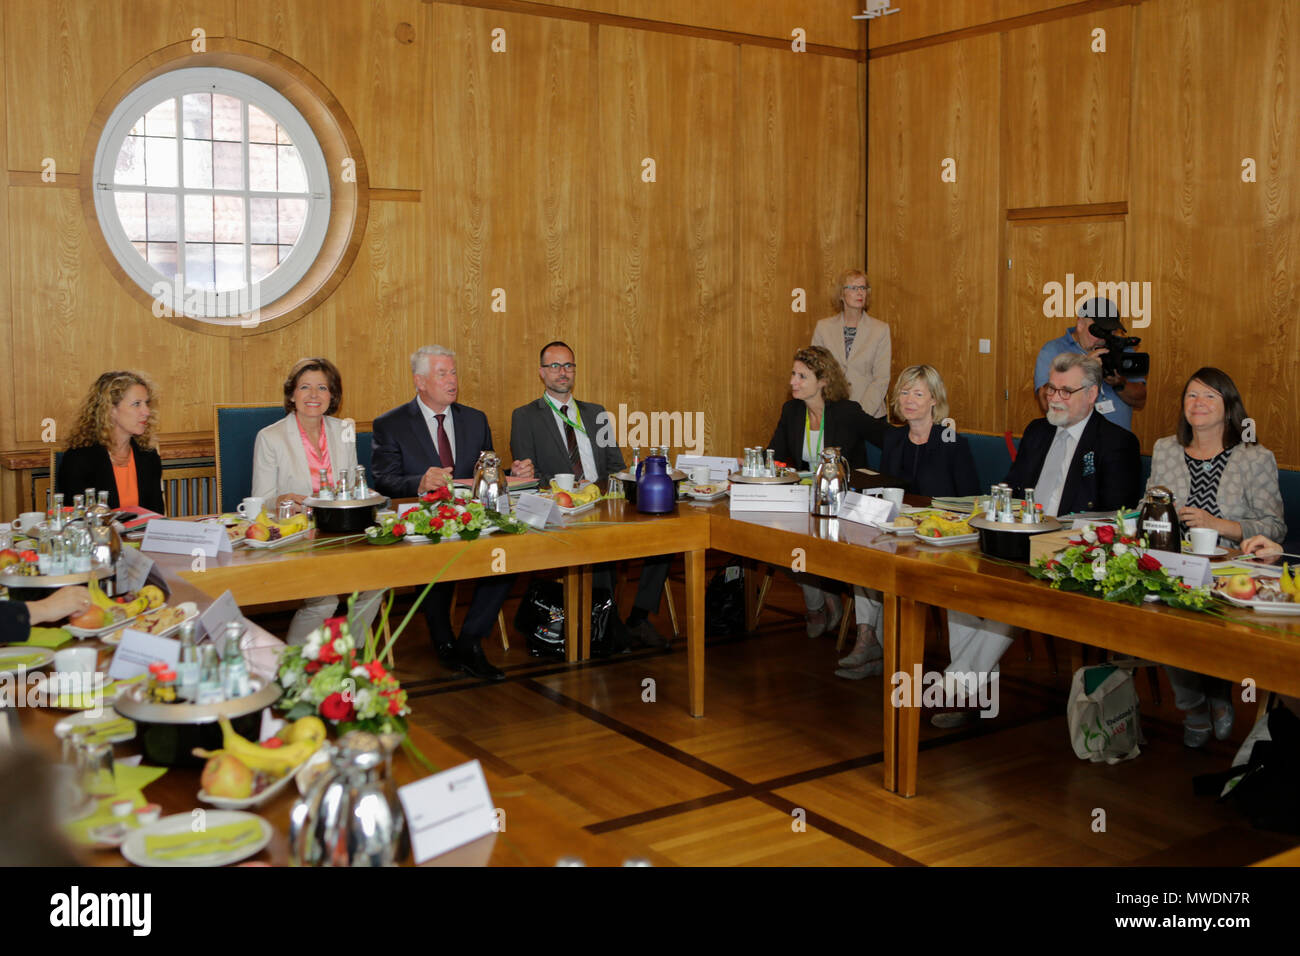 Worms, Germany. 1st June 2018. The Rhineland-Palatinate Minister‐President Malu Dreyer is pictured with ministers and secretaries of state from her cabinet ahead of the cabinet meeting. The Rhineland-Palatine cabinet of Minister‐President Malu Dreyer met in the City Hall in Worms, ahead of the opening of the Rheinland-Pfalz-Tag 2018. Malu Dreyer and her cabinet signed the Golden Book of the city of Worms after the meeting. Around 300.000 visitors are expected in the 34. . Credit: Michael Debets/Alamy Live News Stock Photo